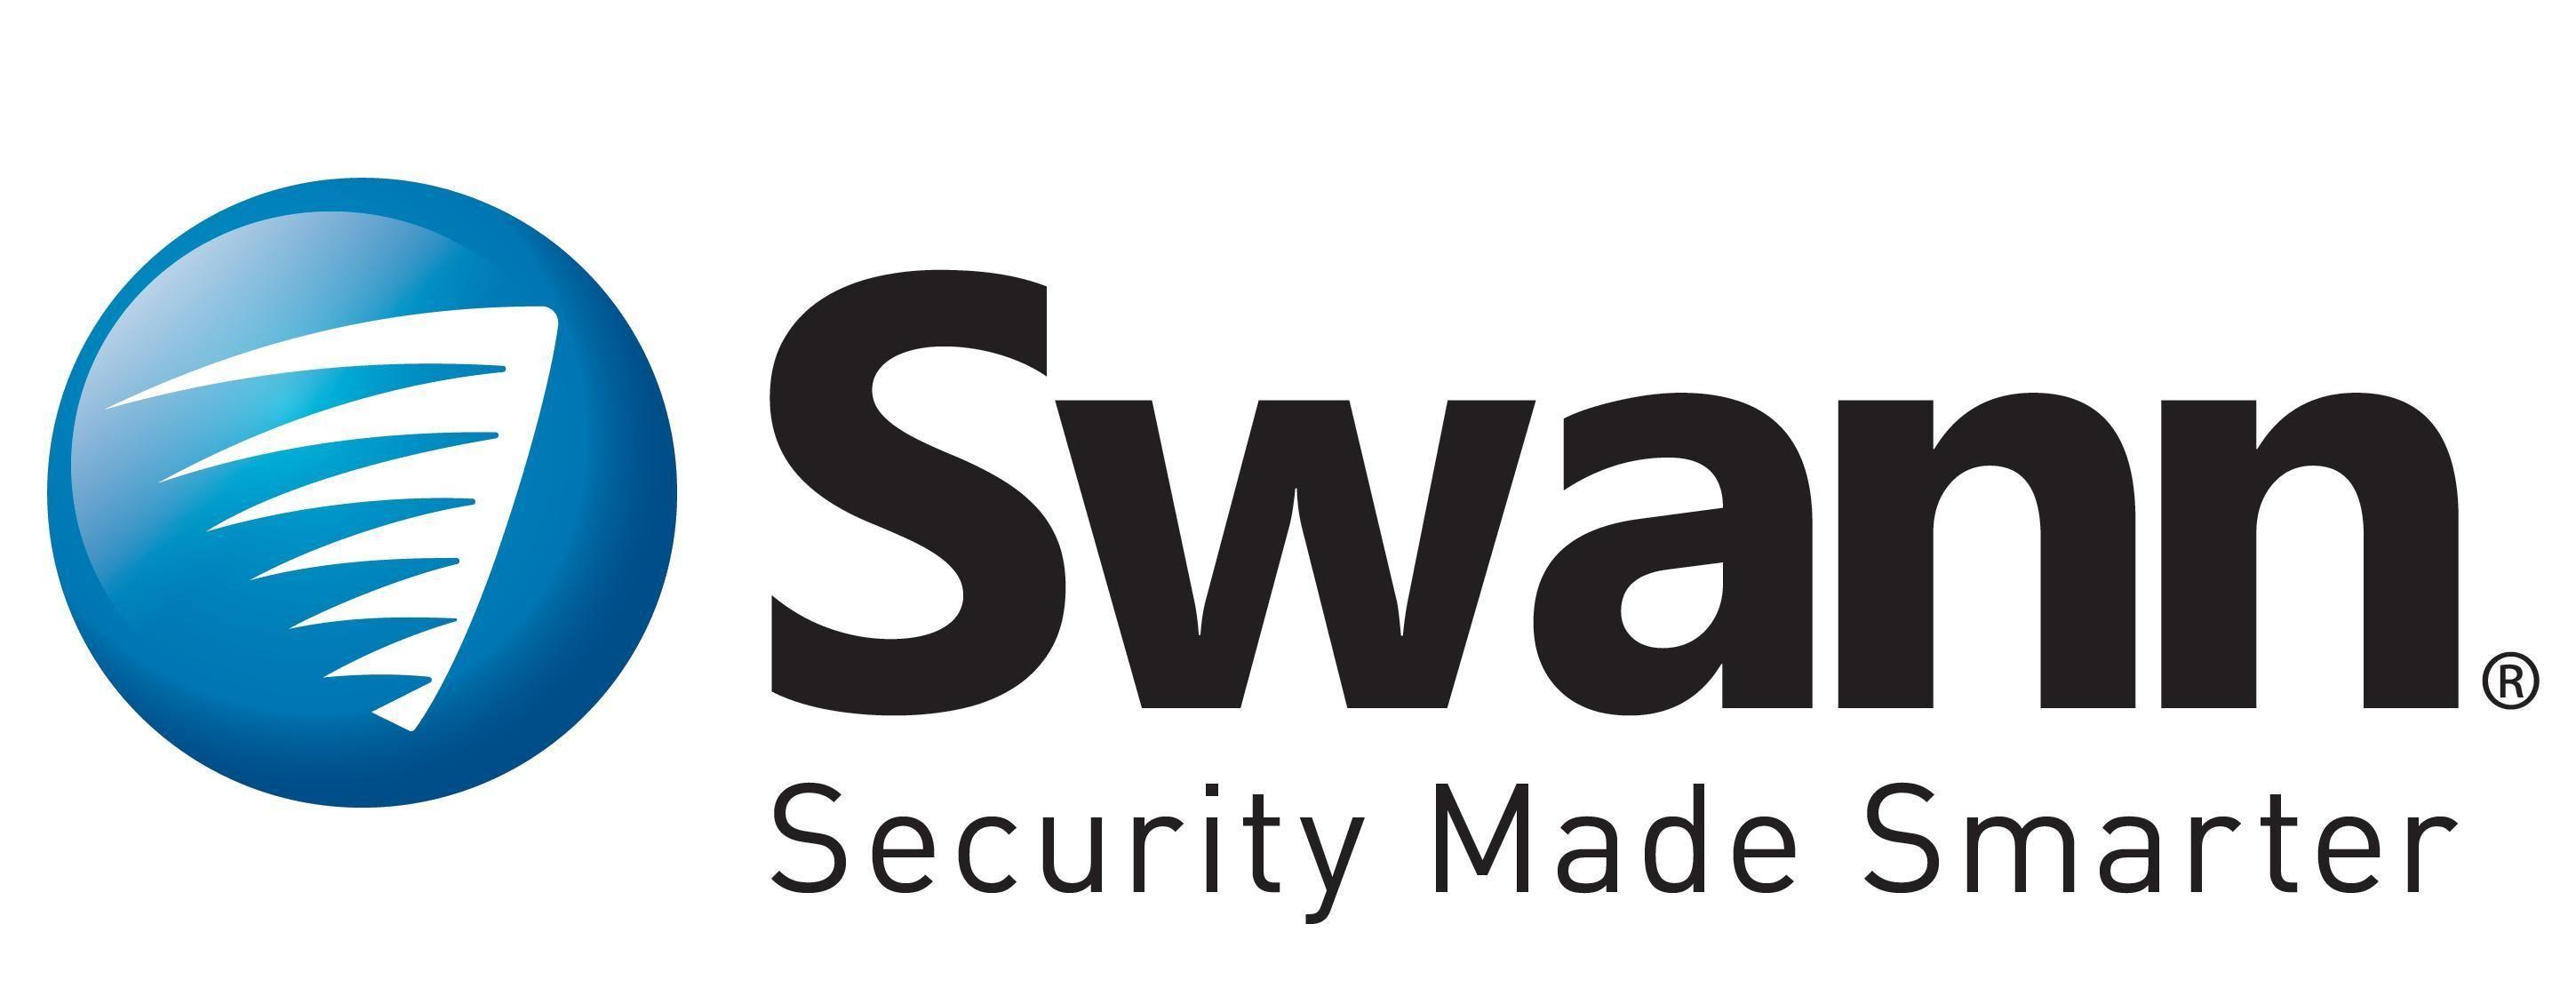 Swann Logo - Swann Competitors, Revenue and Employees - Owler Company Profile